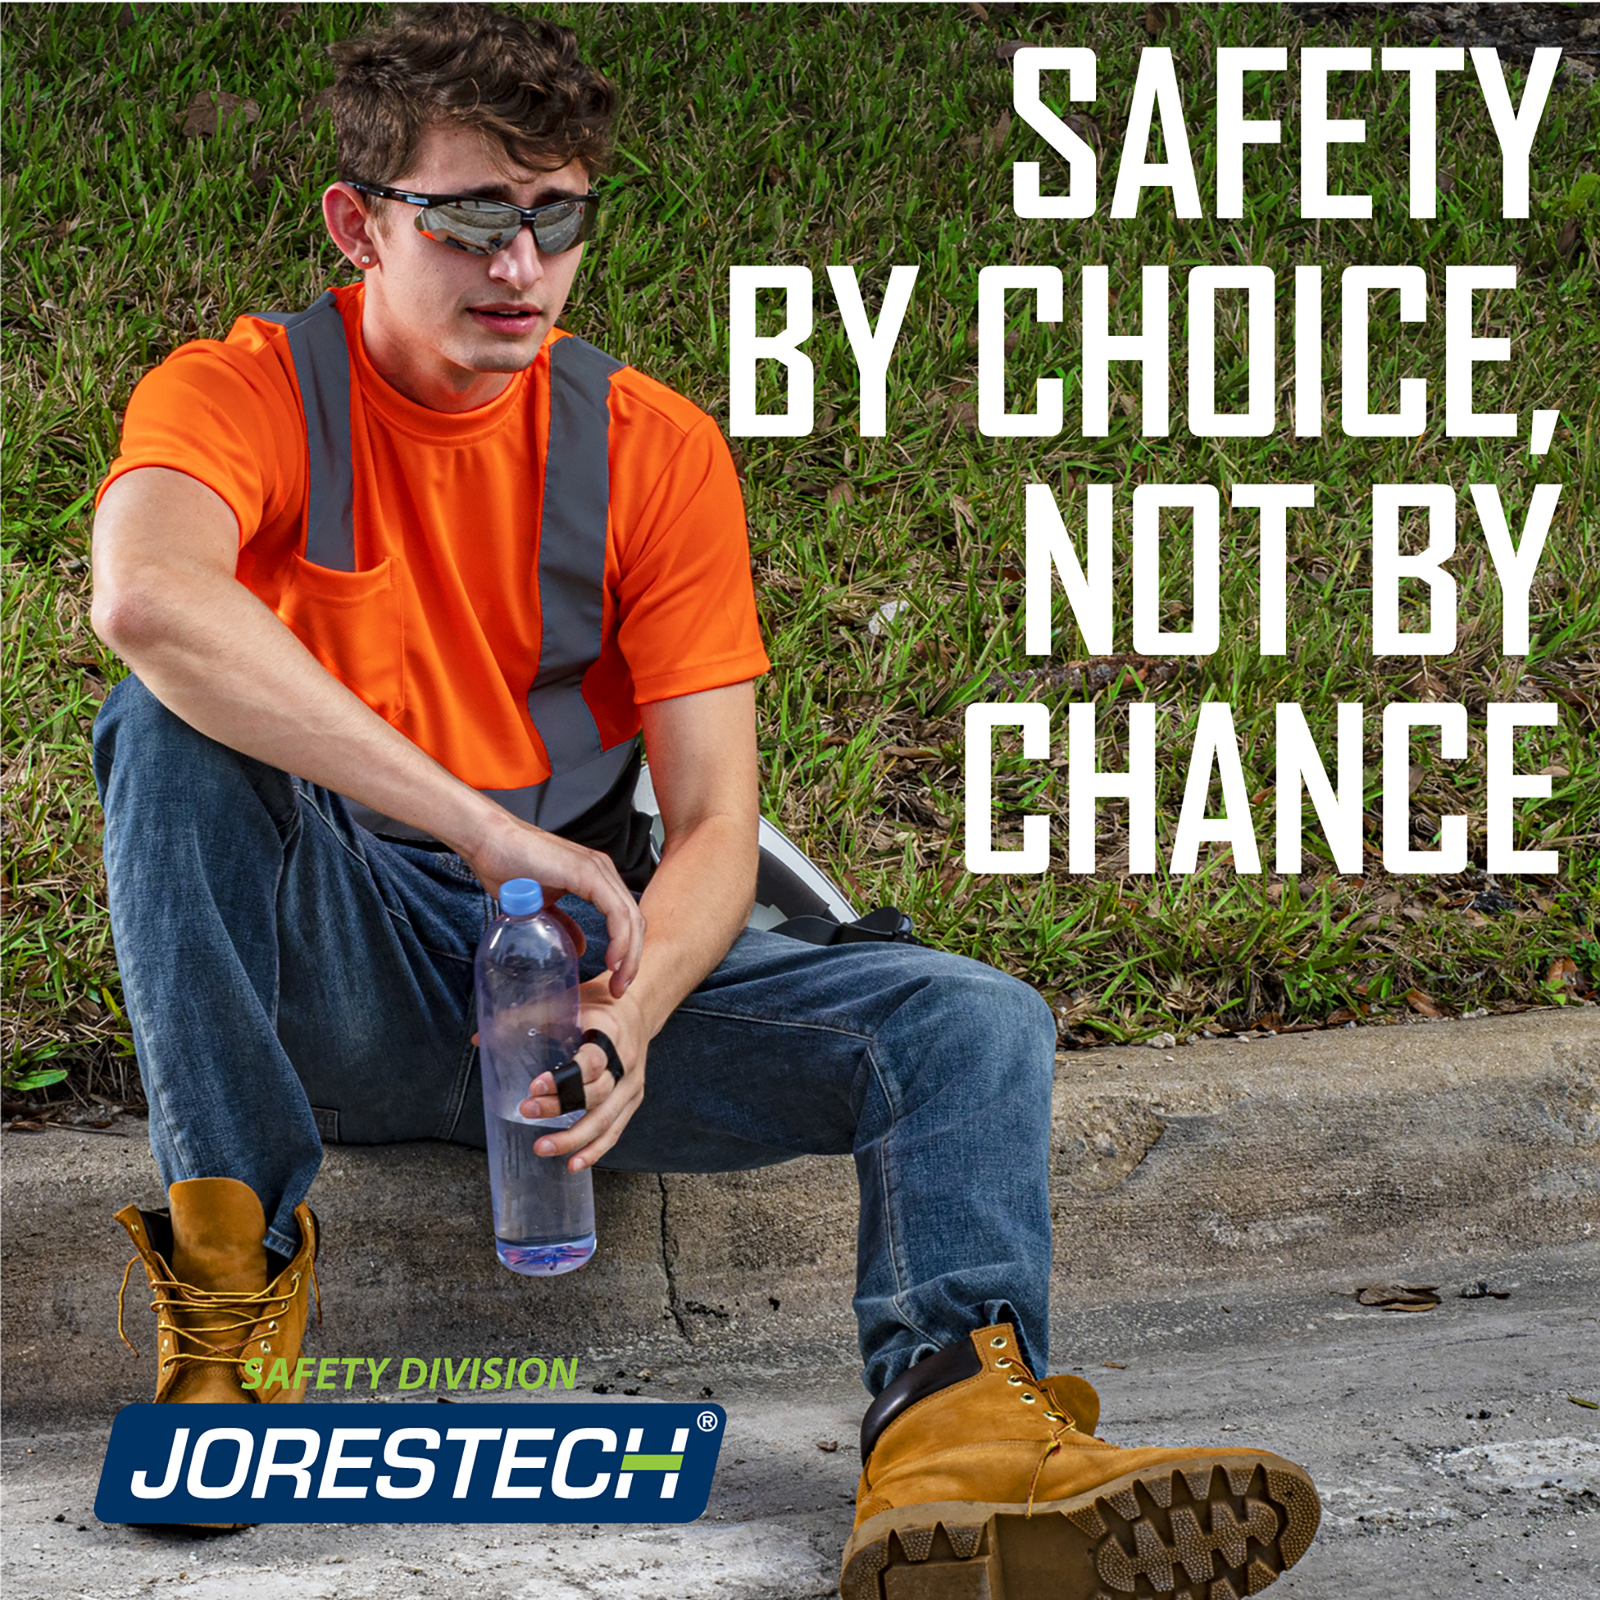 Worker wearing a JORESTECH orange and black safety shirt . He is sitting on the floor with a bottle of water cooling off in a construction. A statement reads, safety by choice not by chance.